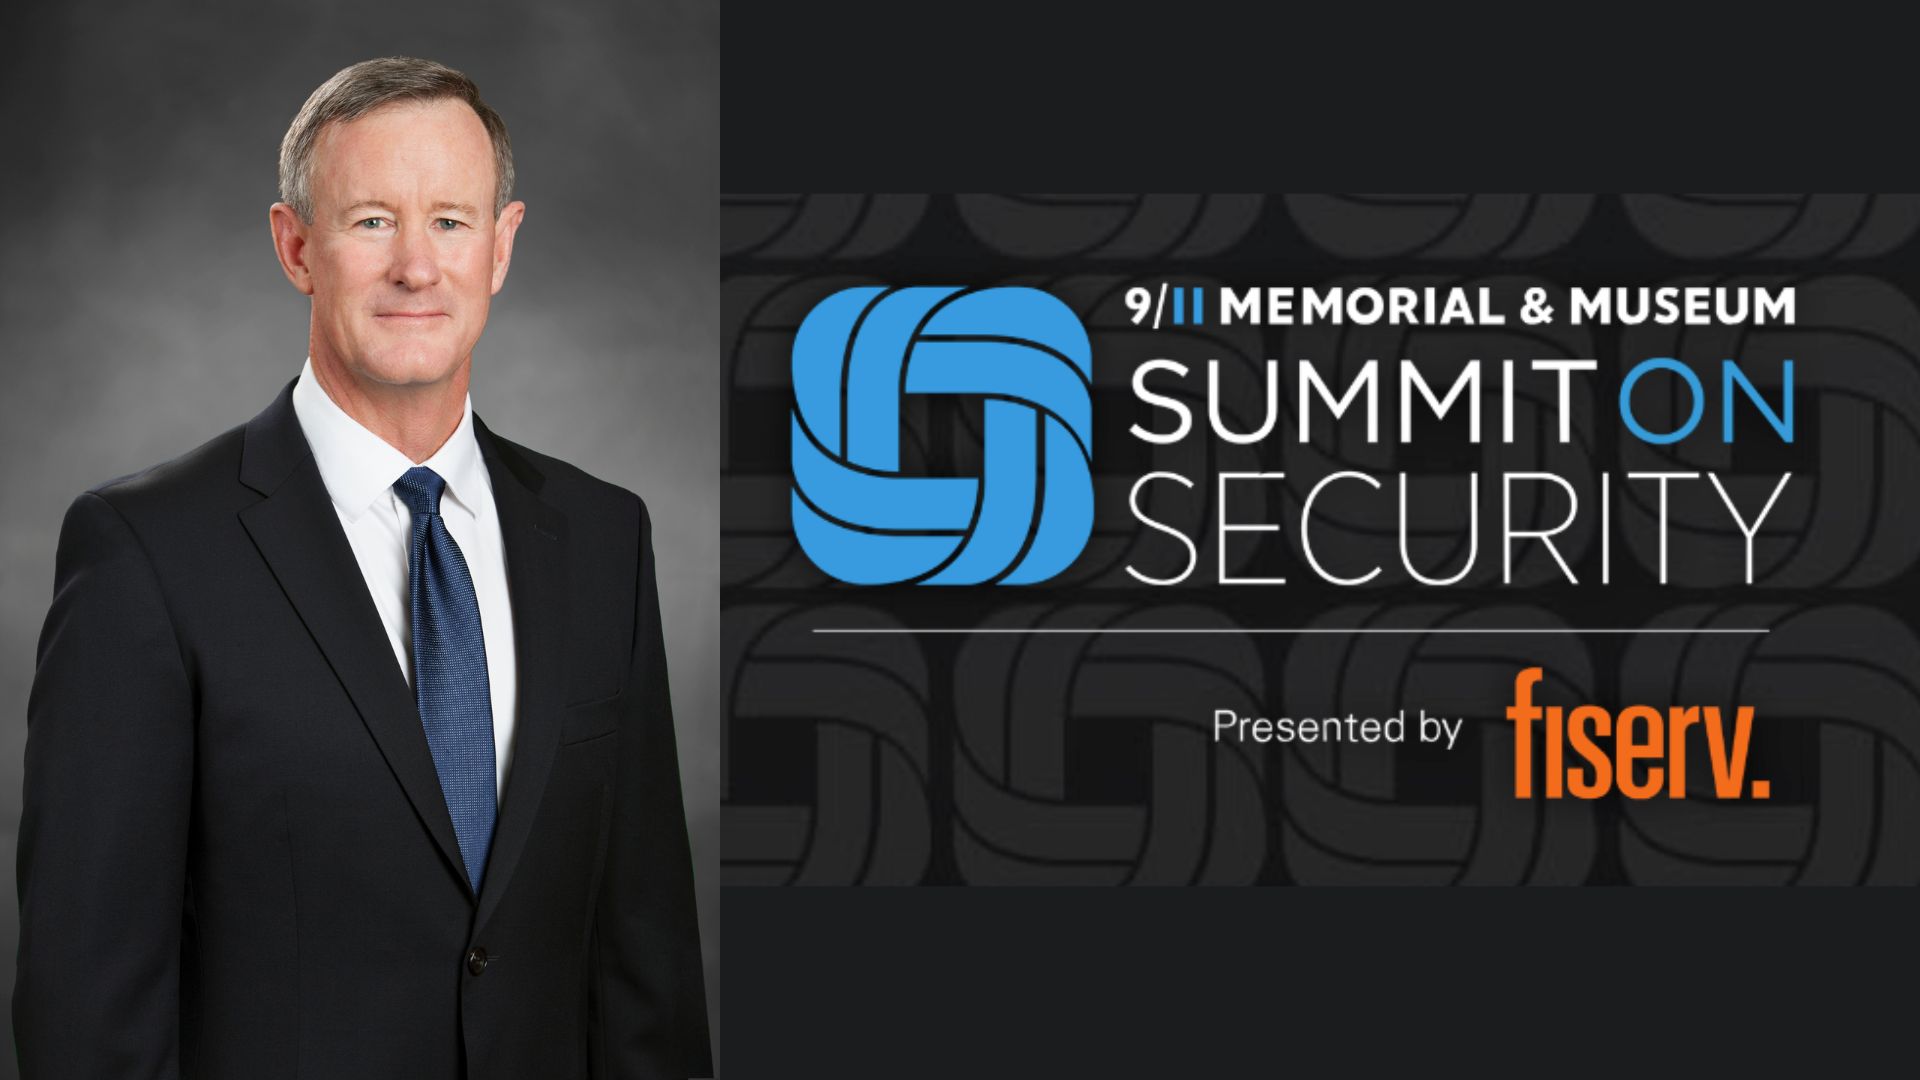 Headshot of Admiral William McRaven on the left, and Summit on Security logo on right